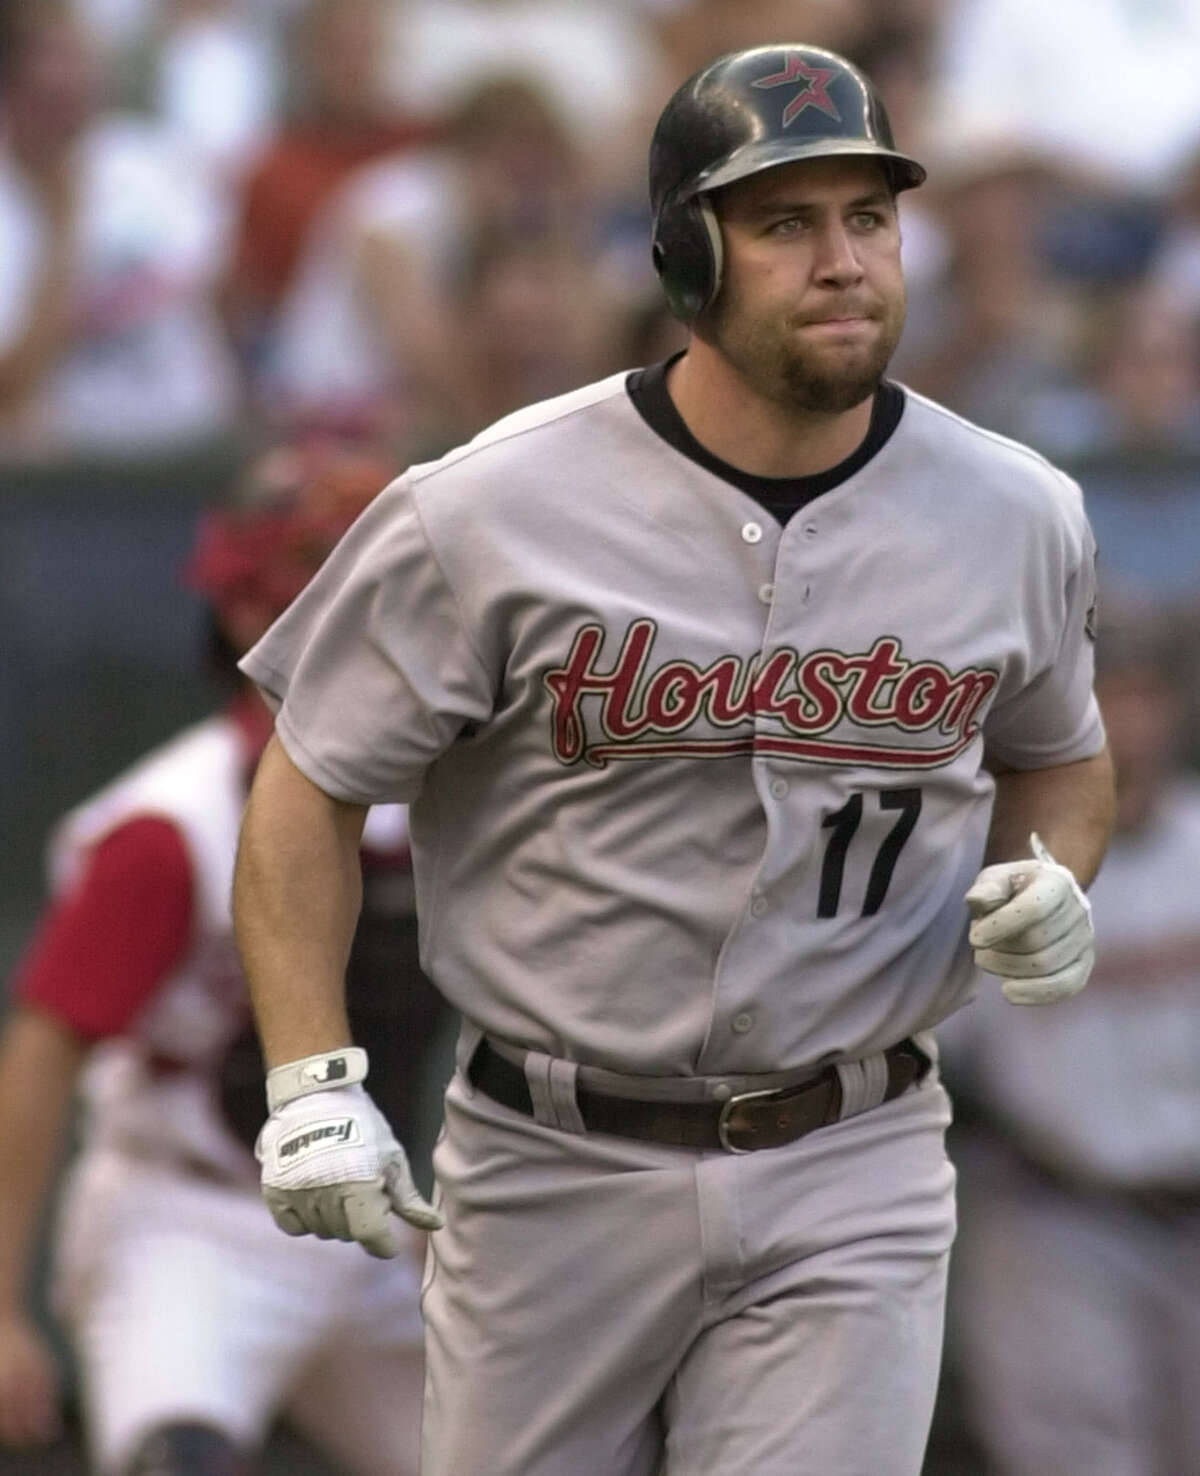 2. Lance Berkman  Current job: head coach, Second Baptist  Arguably the best player in Rice history, Berkman has expressed interest in the job. He spent 15 years in the majors and was a six-time All-Star and won a World Series with St. Louis in 2011. He spent his first 11 seasons in Houston and is one of the most popular players in Astros history. If there is a knock on Berkman it’s the absence of any college coaching experience. He has spent the past few years as the head coach at Second Baptist, winning the TAPPS 4A state title in his first season in 2016. If Rice is looking to make a big splash, then Berkman is the guy.